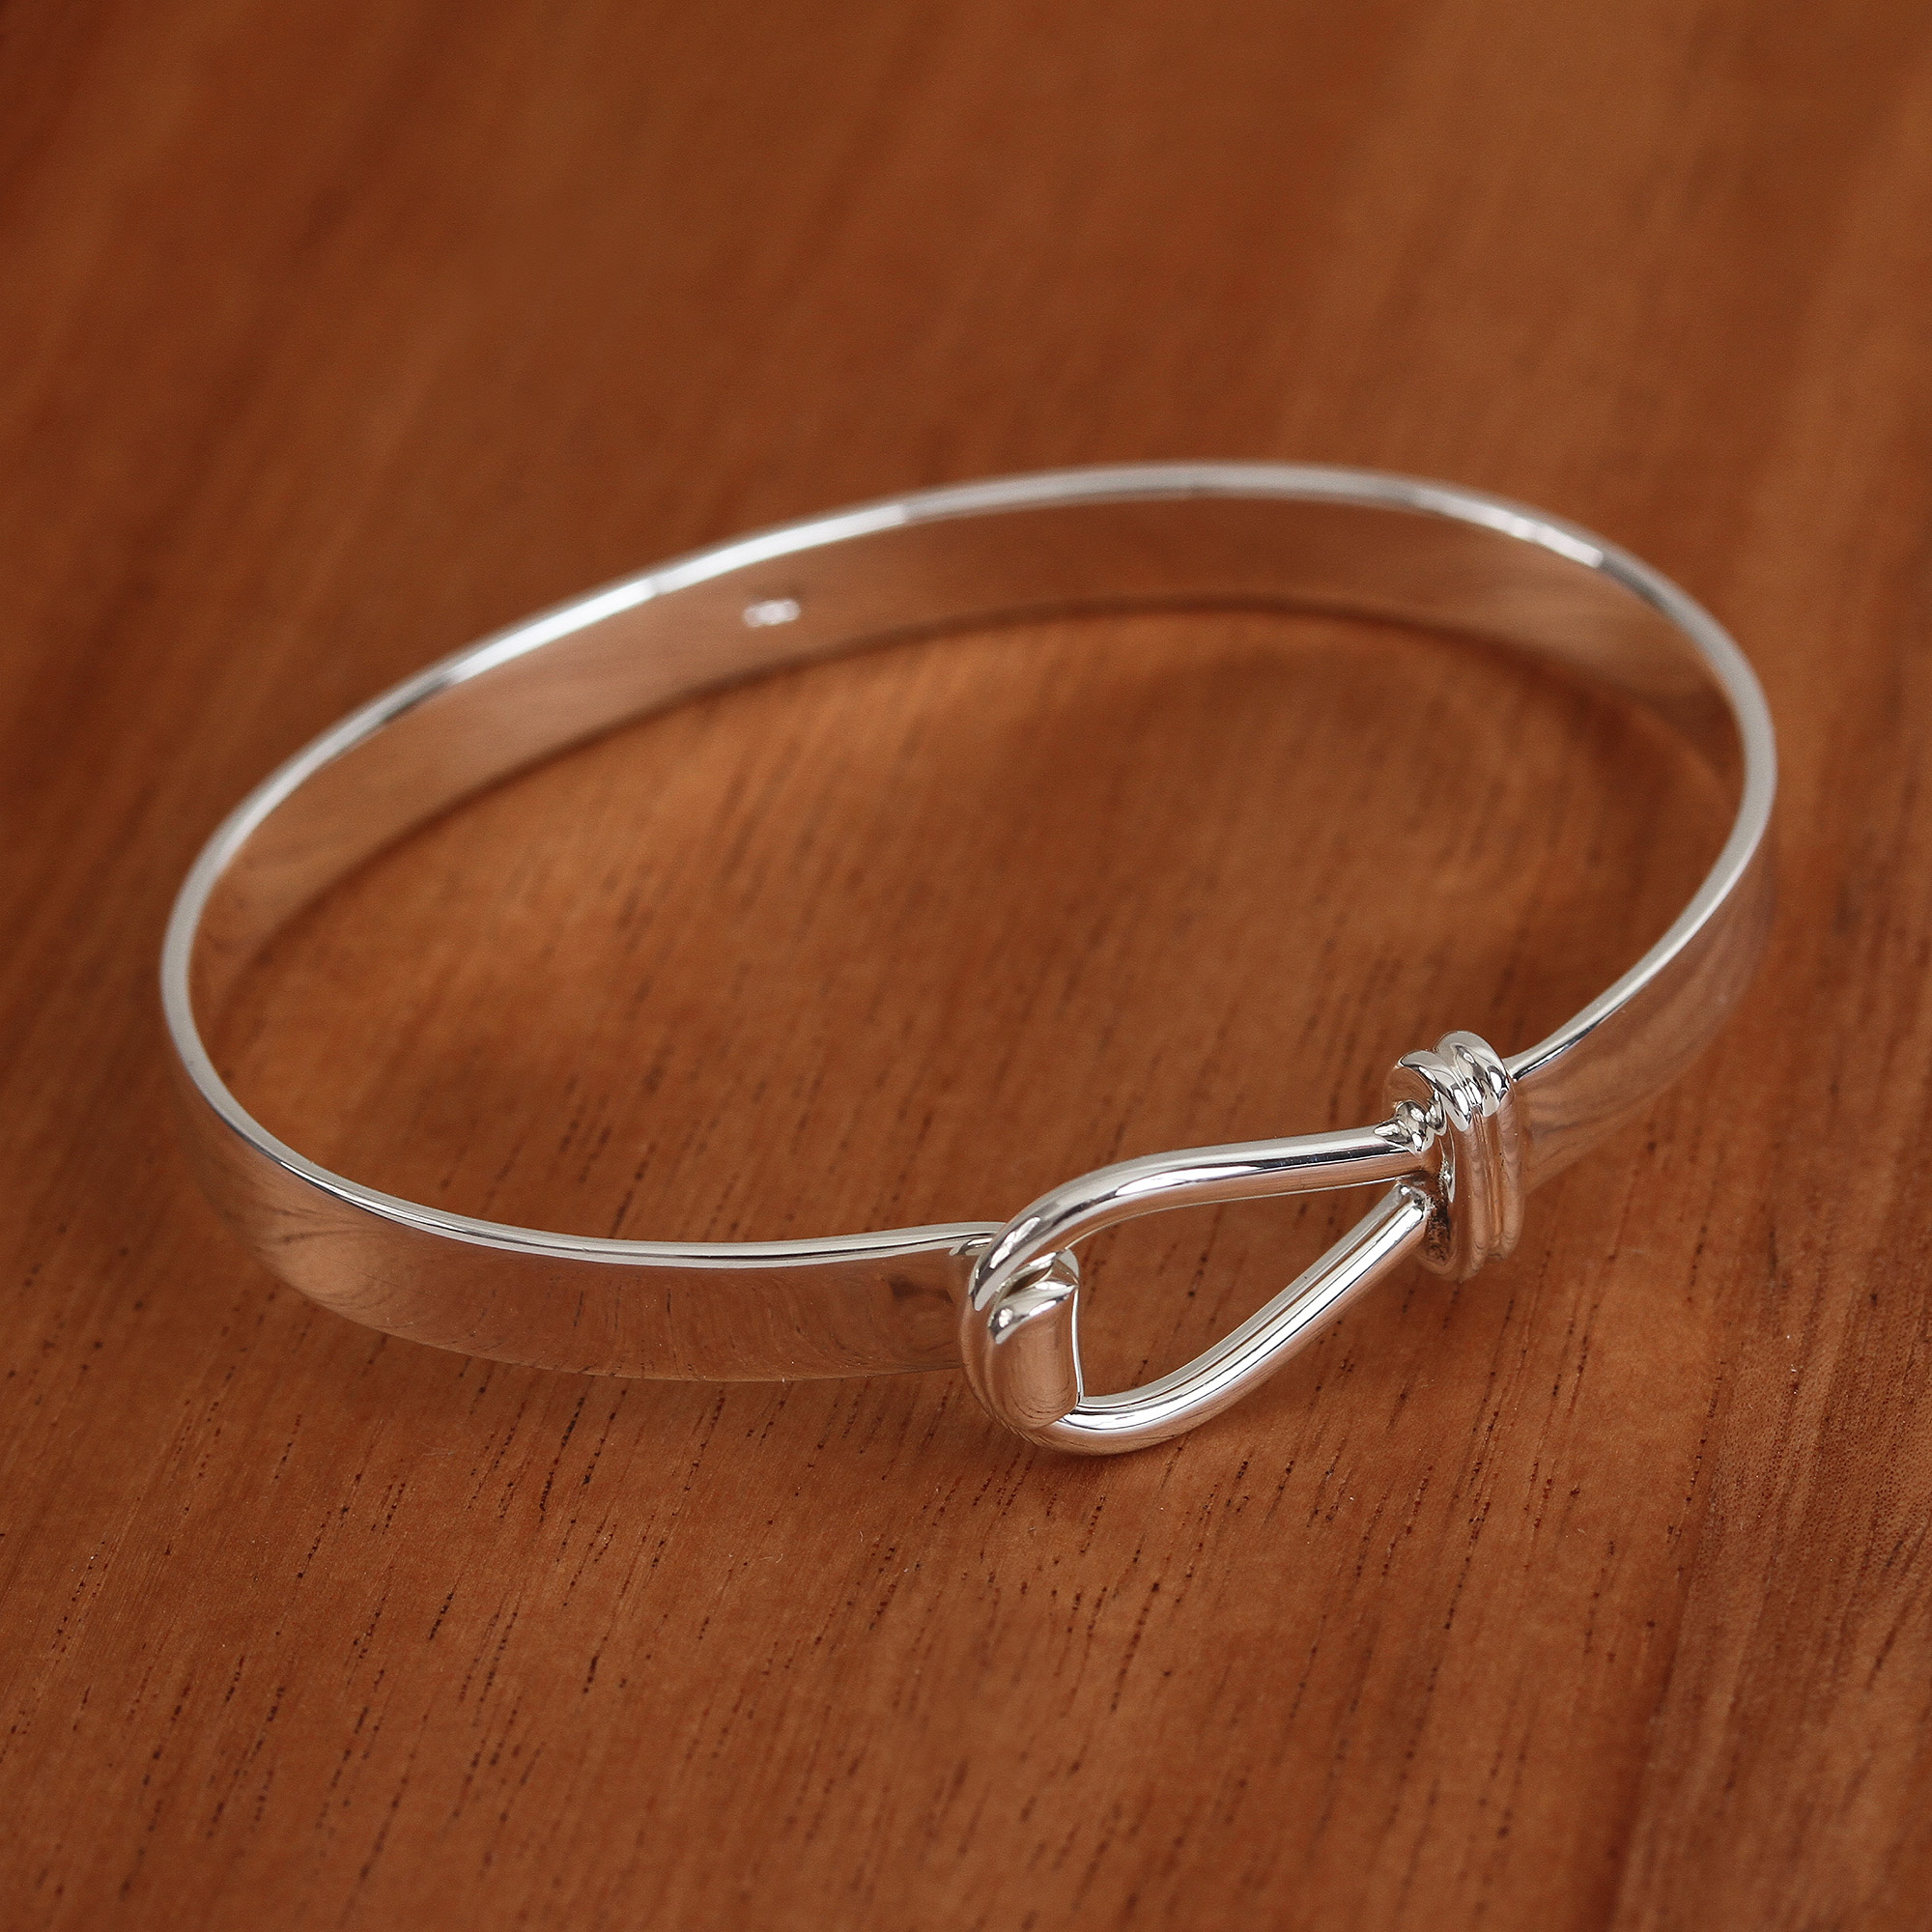 High-Polish Sterling Silver Bangle Bracelet from Mexico, 'Simple Union